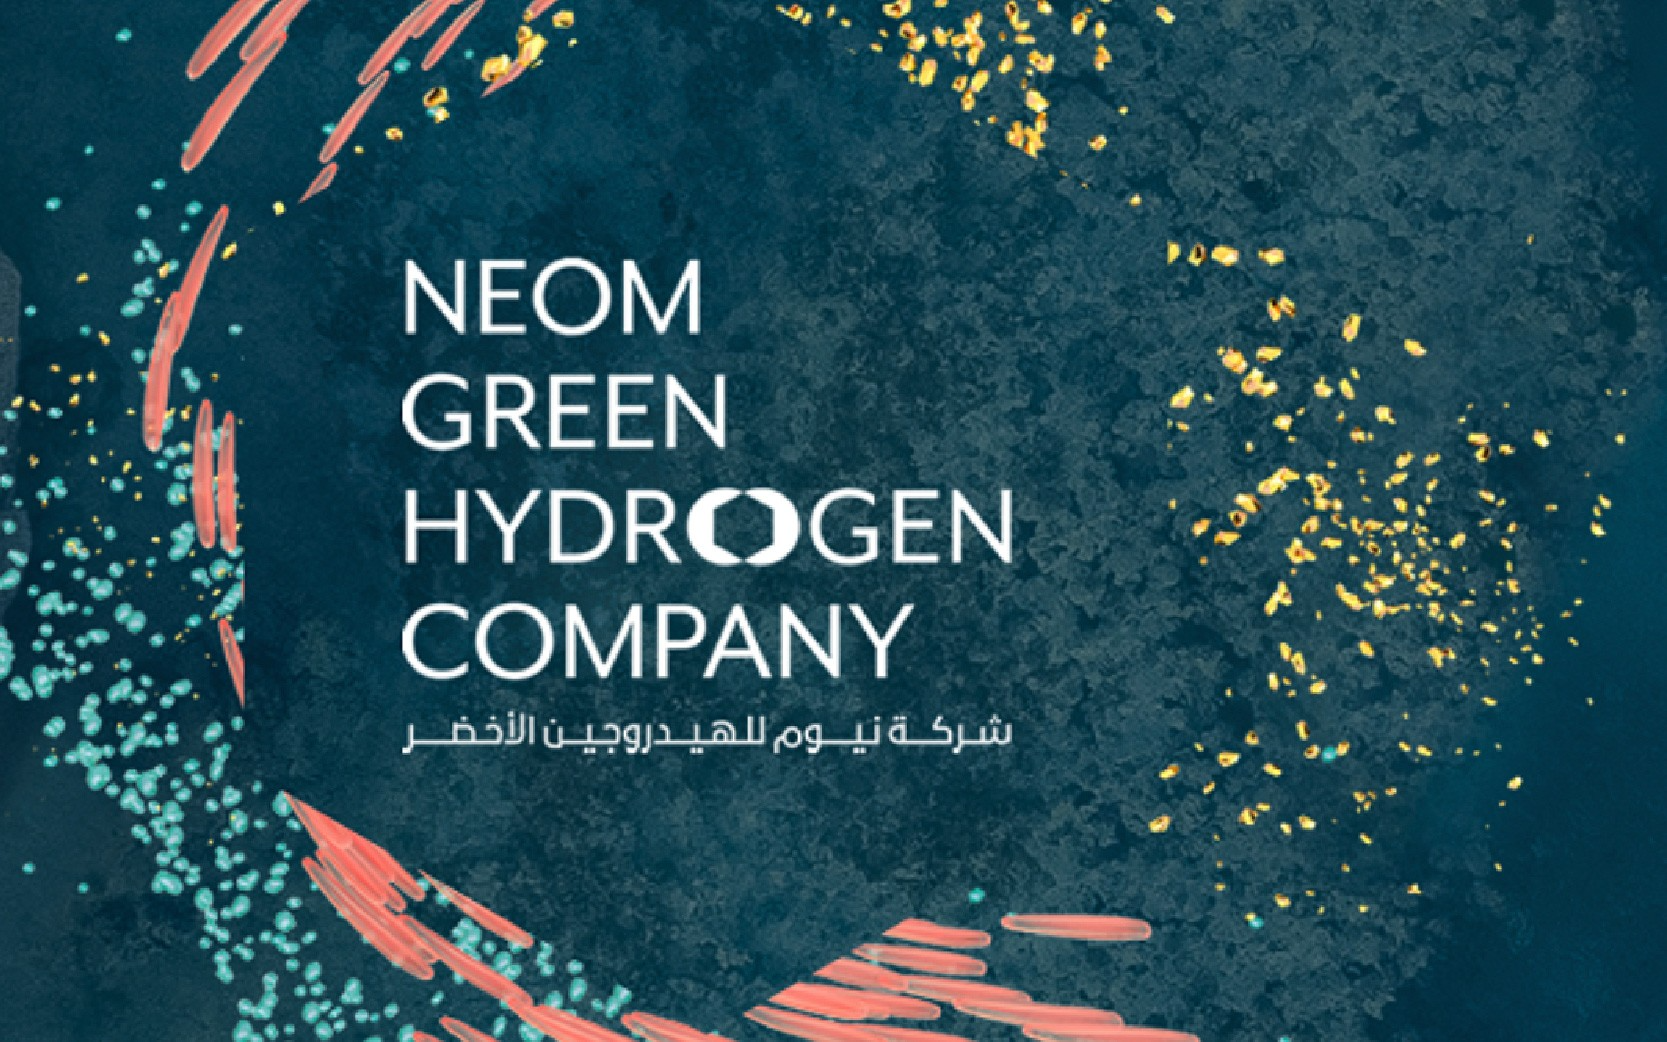 NEOM Green Hydrogen Company Completes Financial Close at a Total Investment Value of USD 8.4 Billion in the World’s Largest Carbon-Free Green Hydrogen Plant